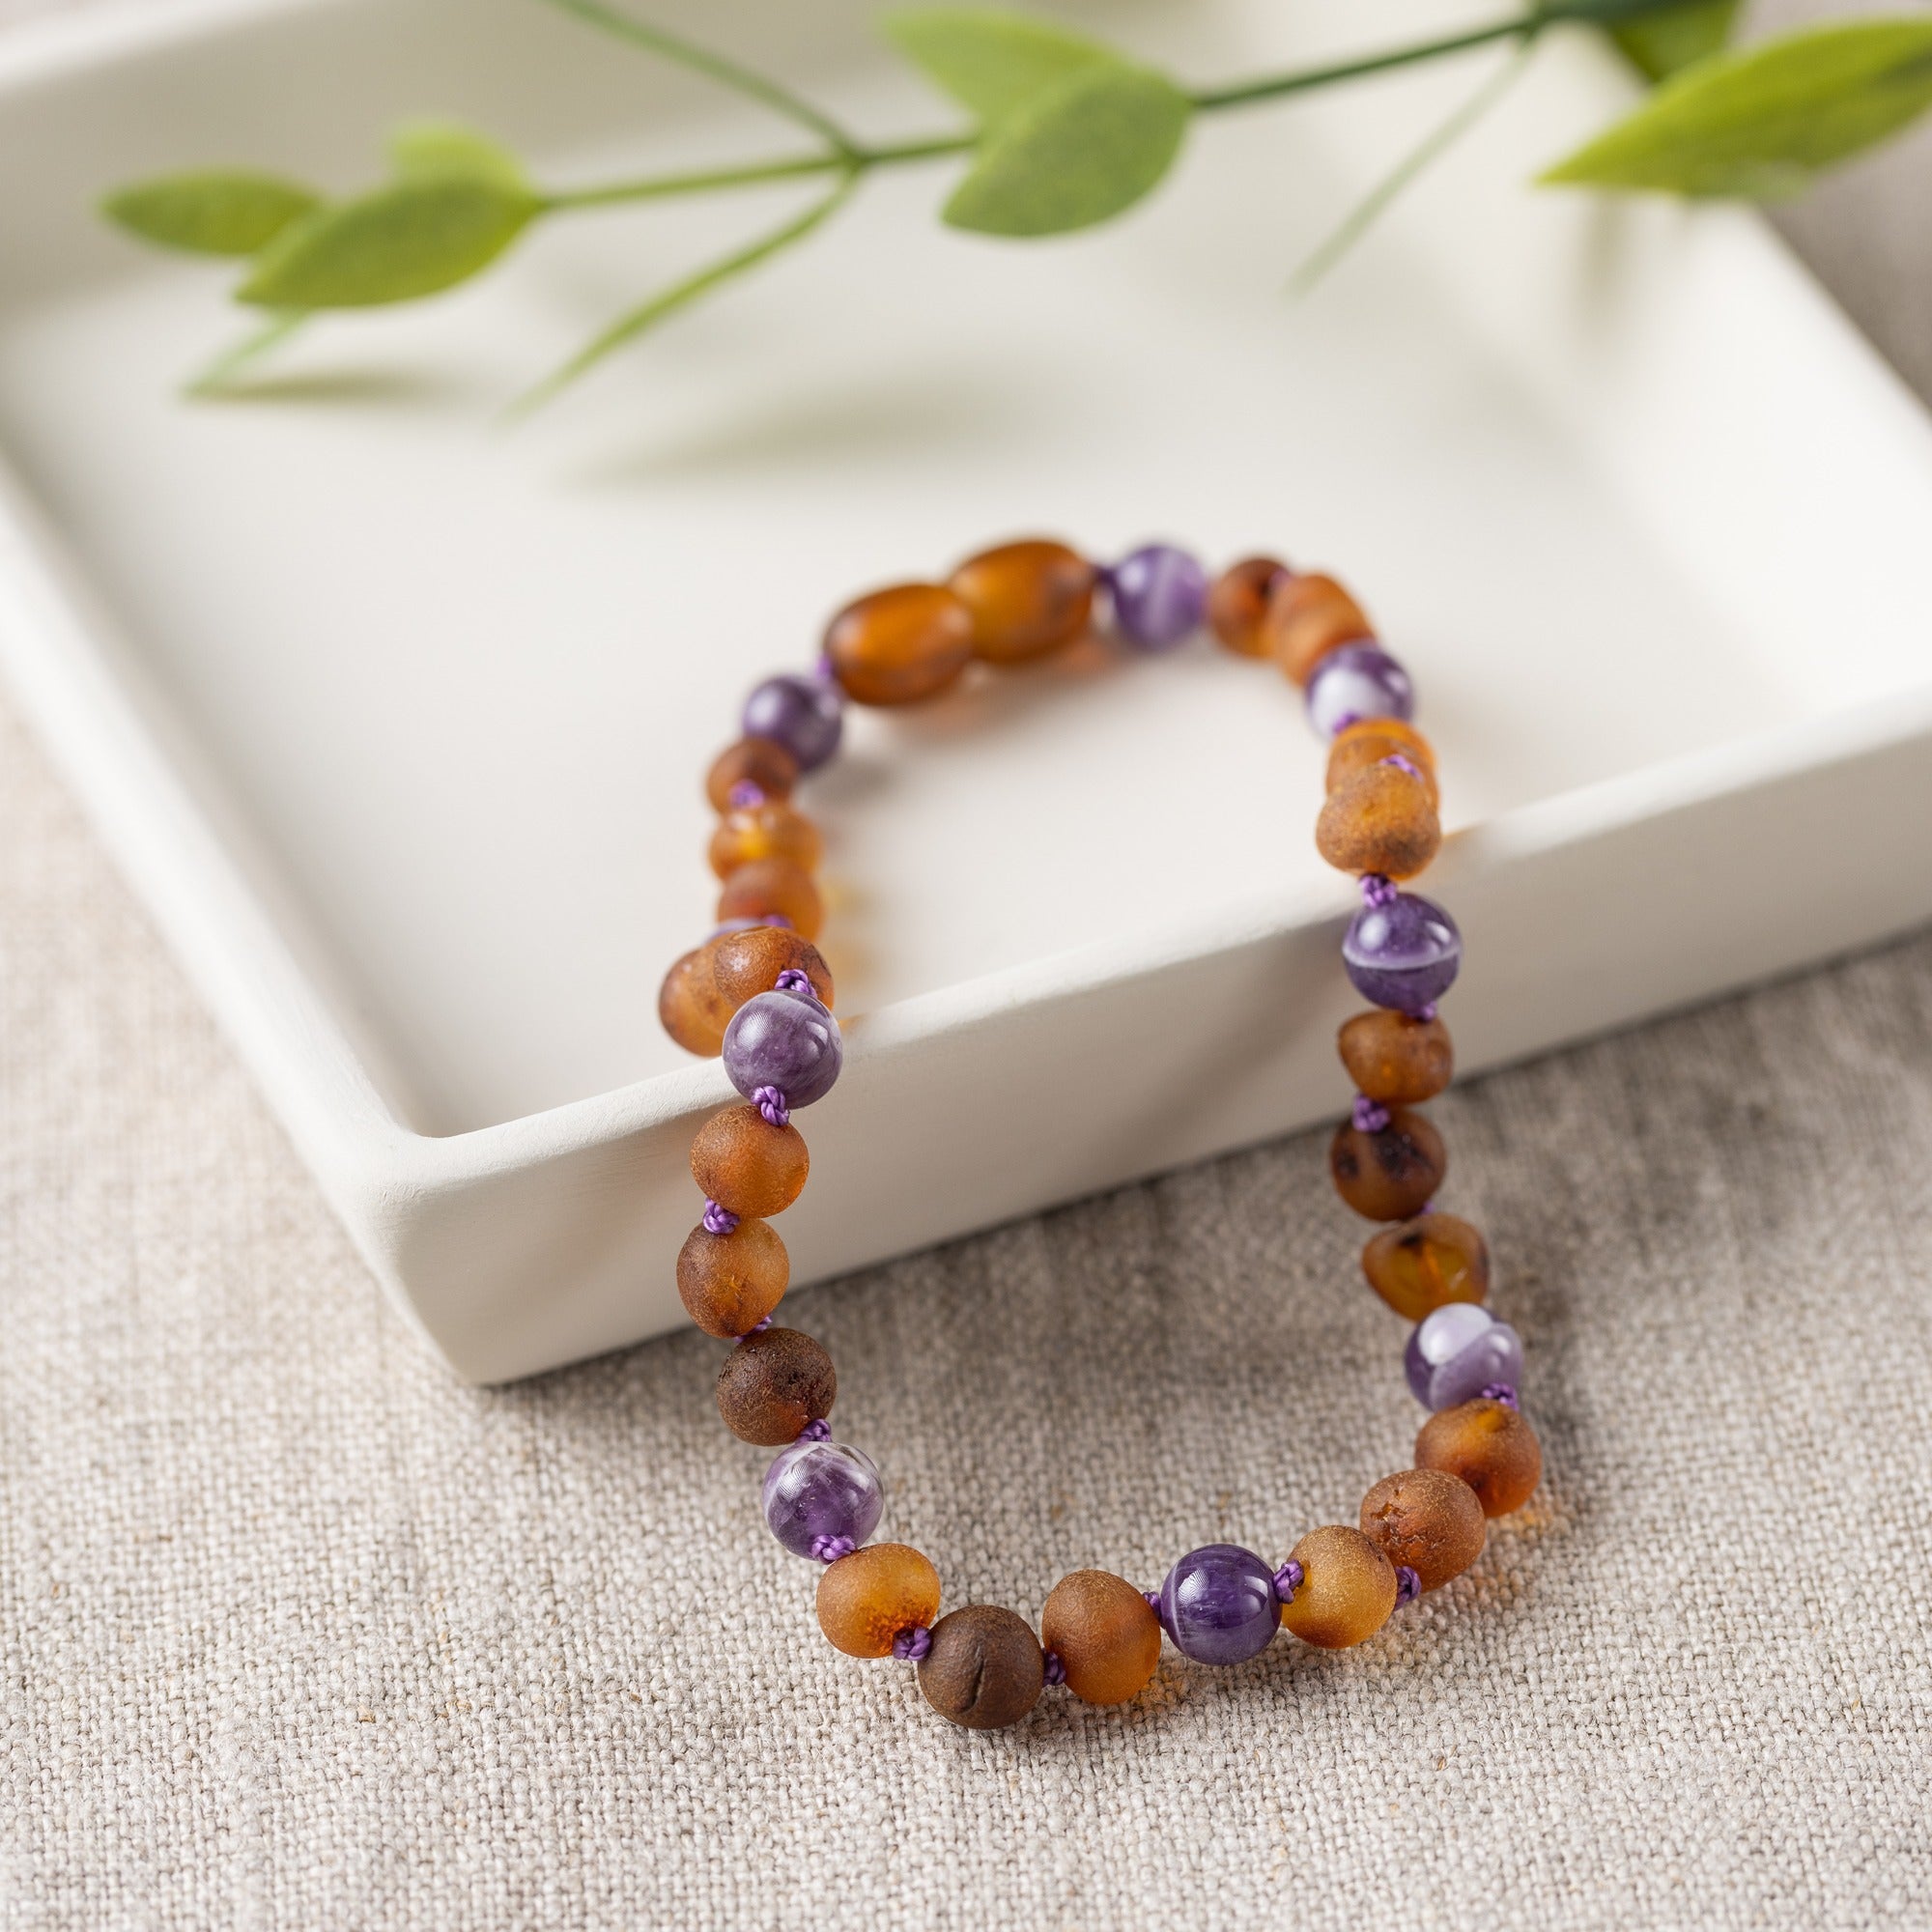 Amberalia Adjustable Adult Baltic Amber Knotted Bracelet (6.3 + 3.5 inch) -  THESE BEADS ARE VERY SMALL, recommended for small wrists, bead sizes  between 4.5 and 5.5mm- Light Green - Walmart.com